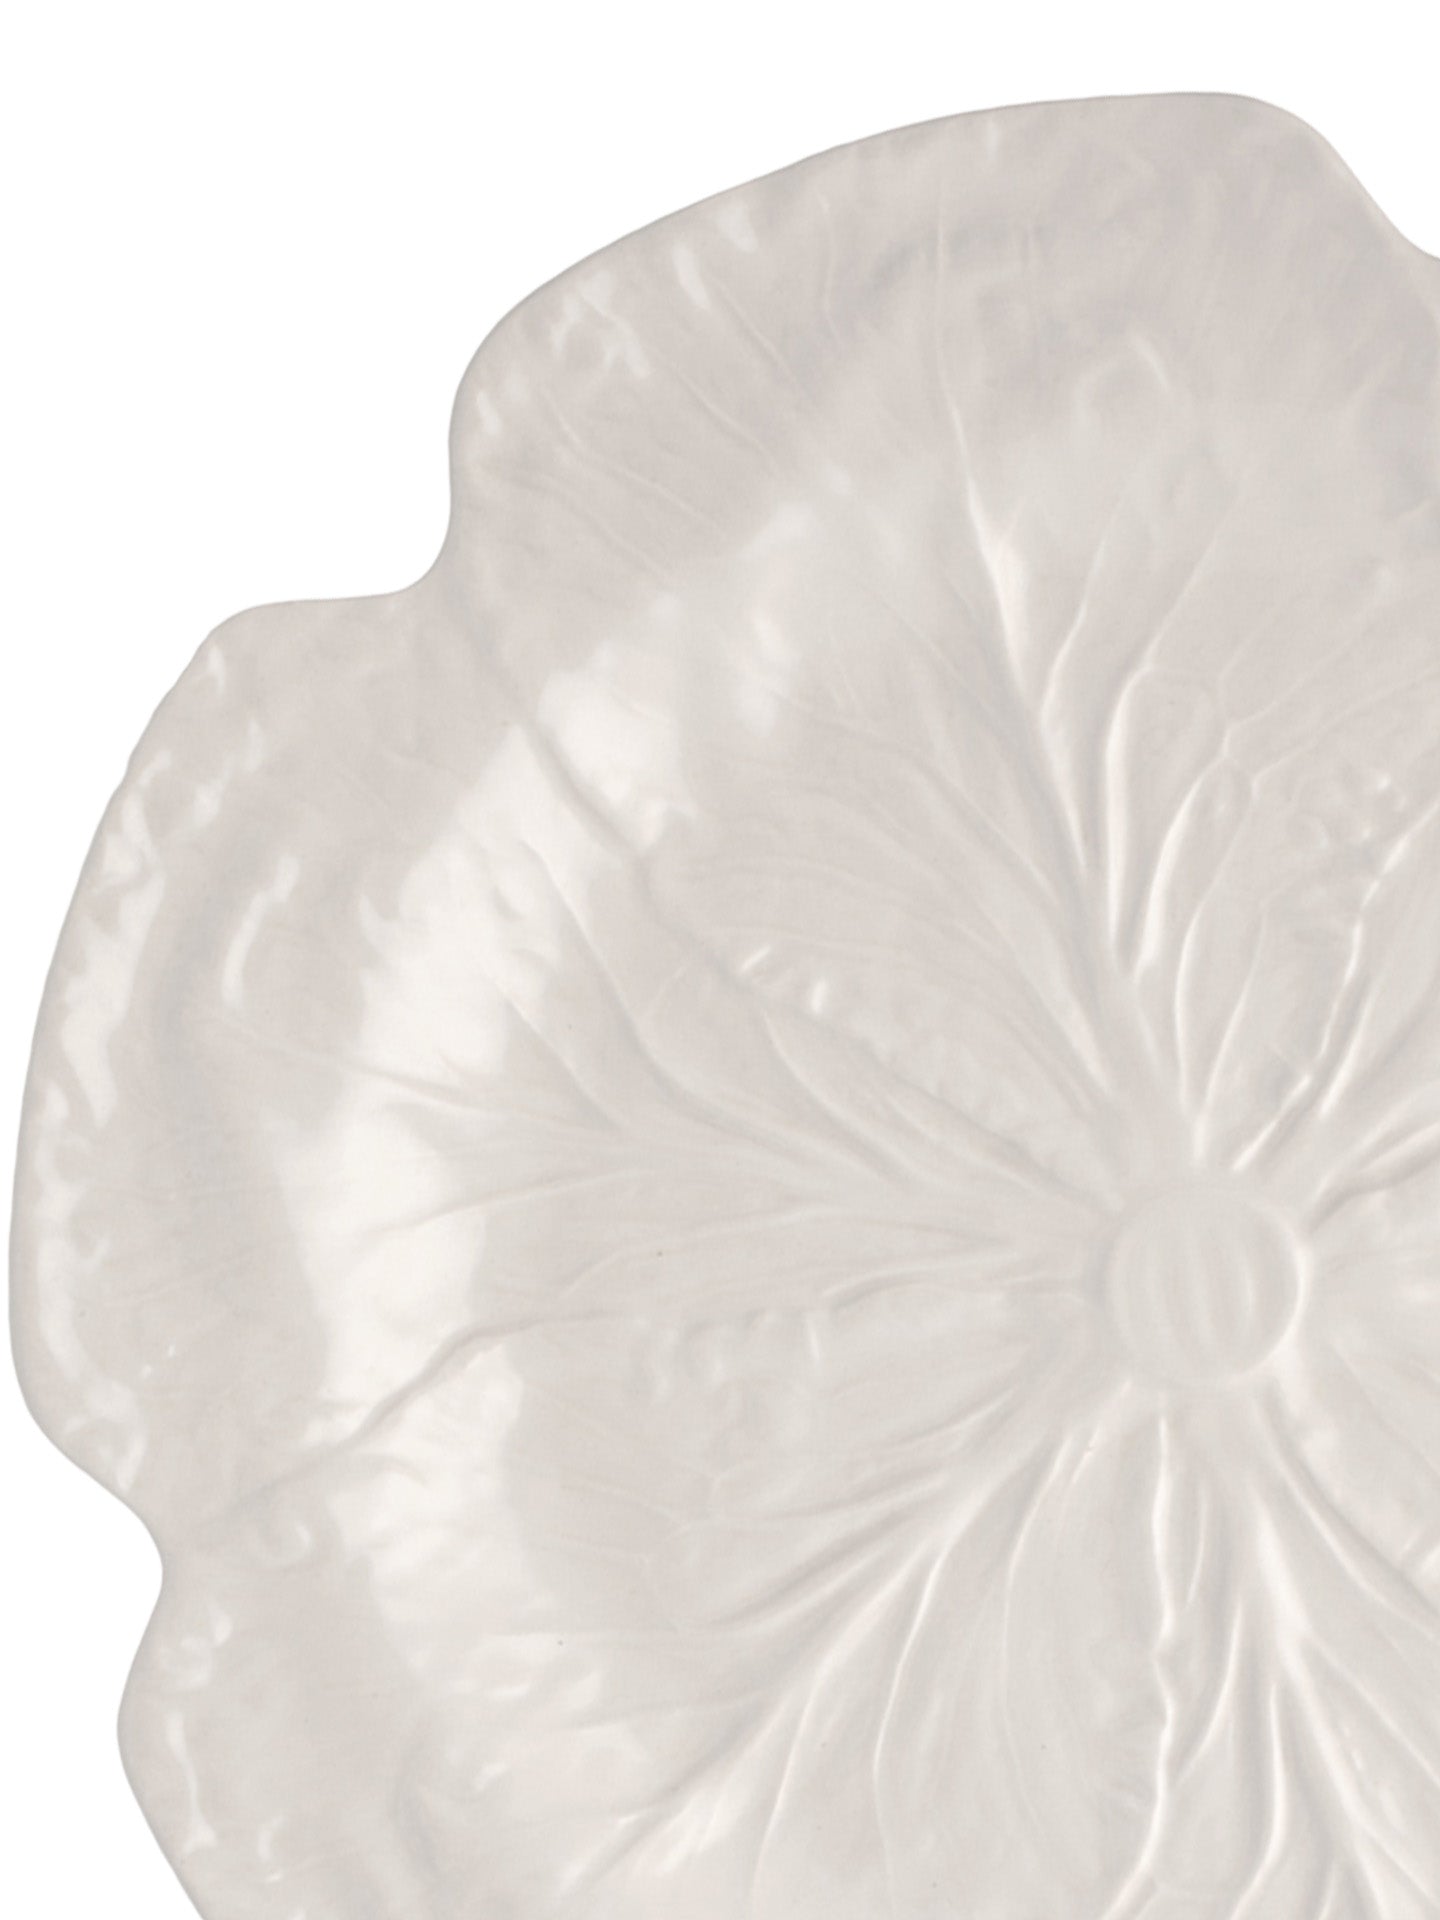 Extra Large Dinner Plate Cabbage, Ivory